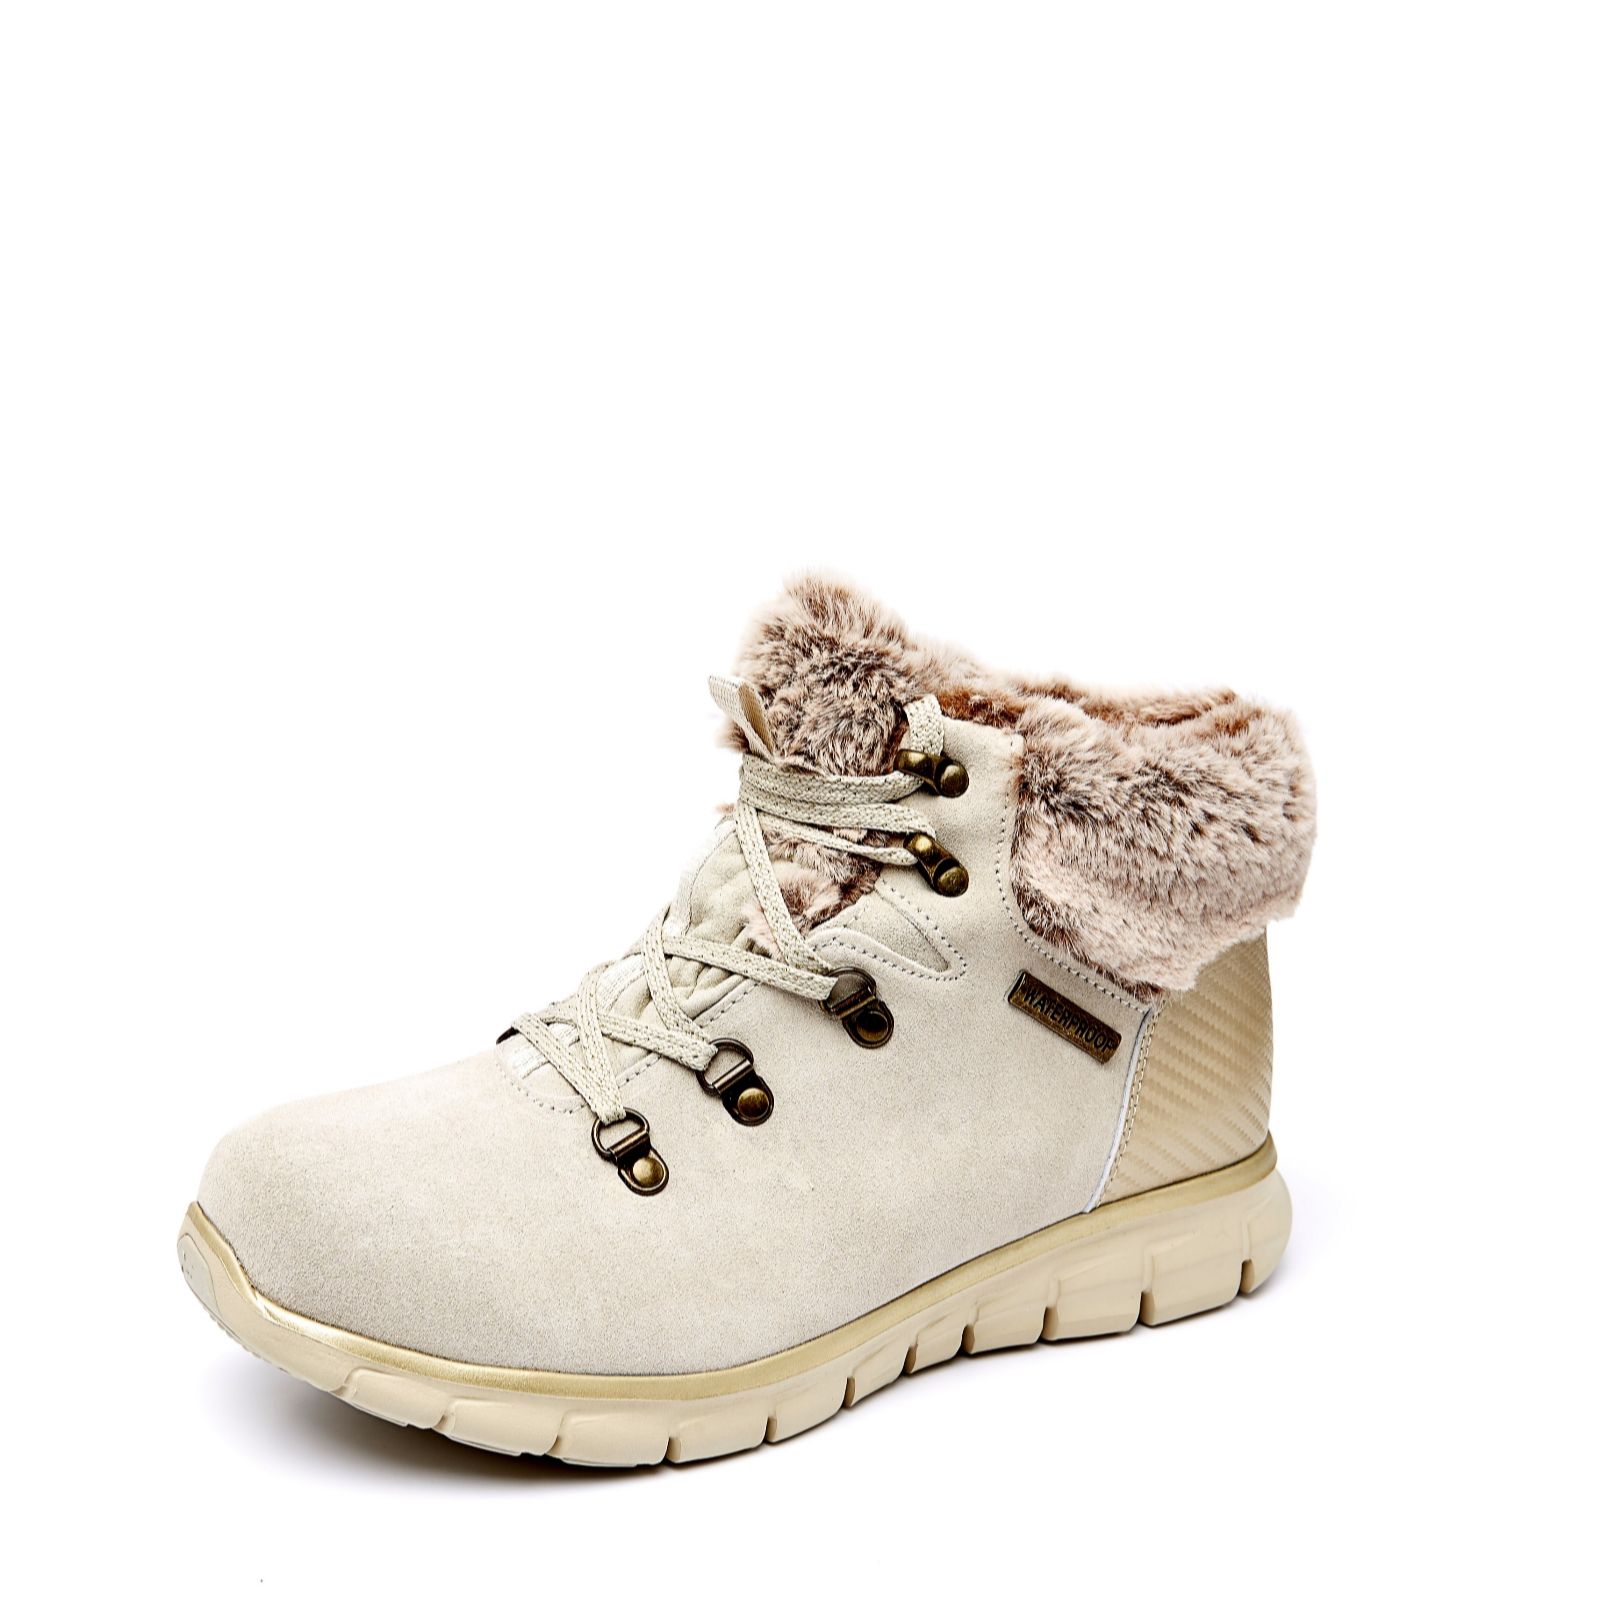 Skechers Synergy Lace Boot - QVC UK